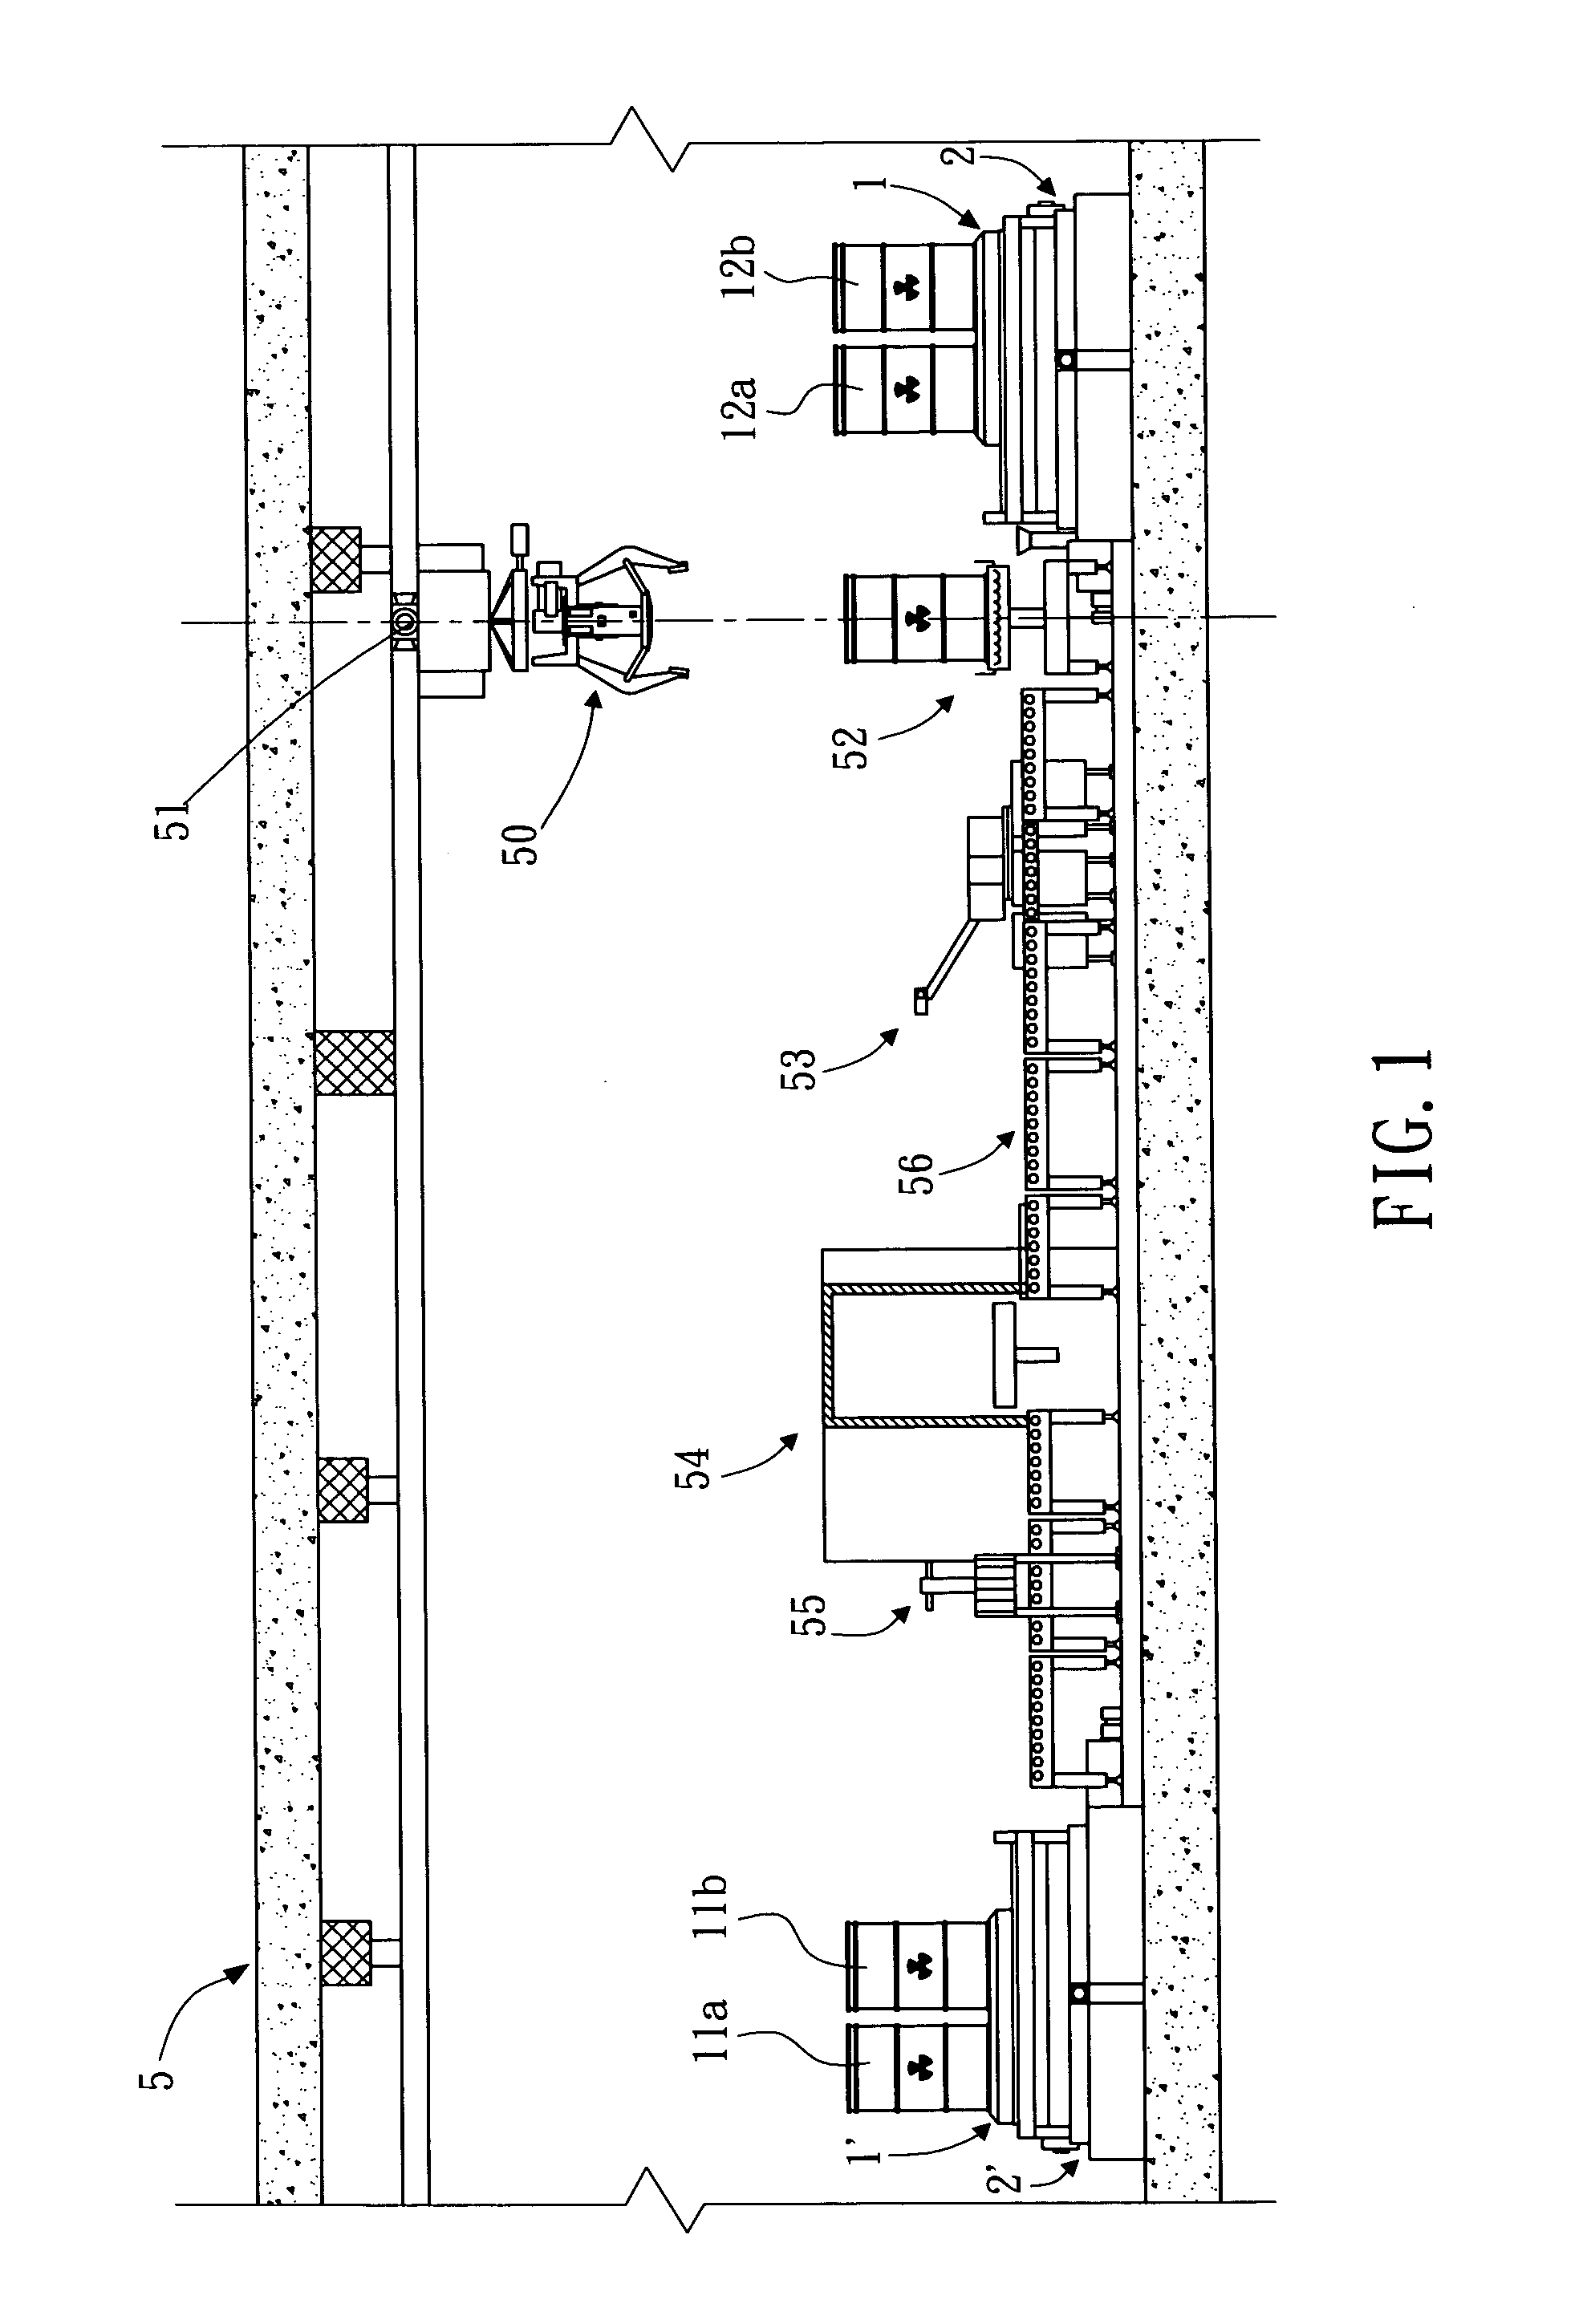 Automatic pallet loading/unloading method for radioactive waste drums of nuclear waste inspection procedure